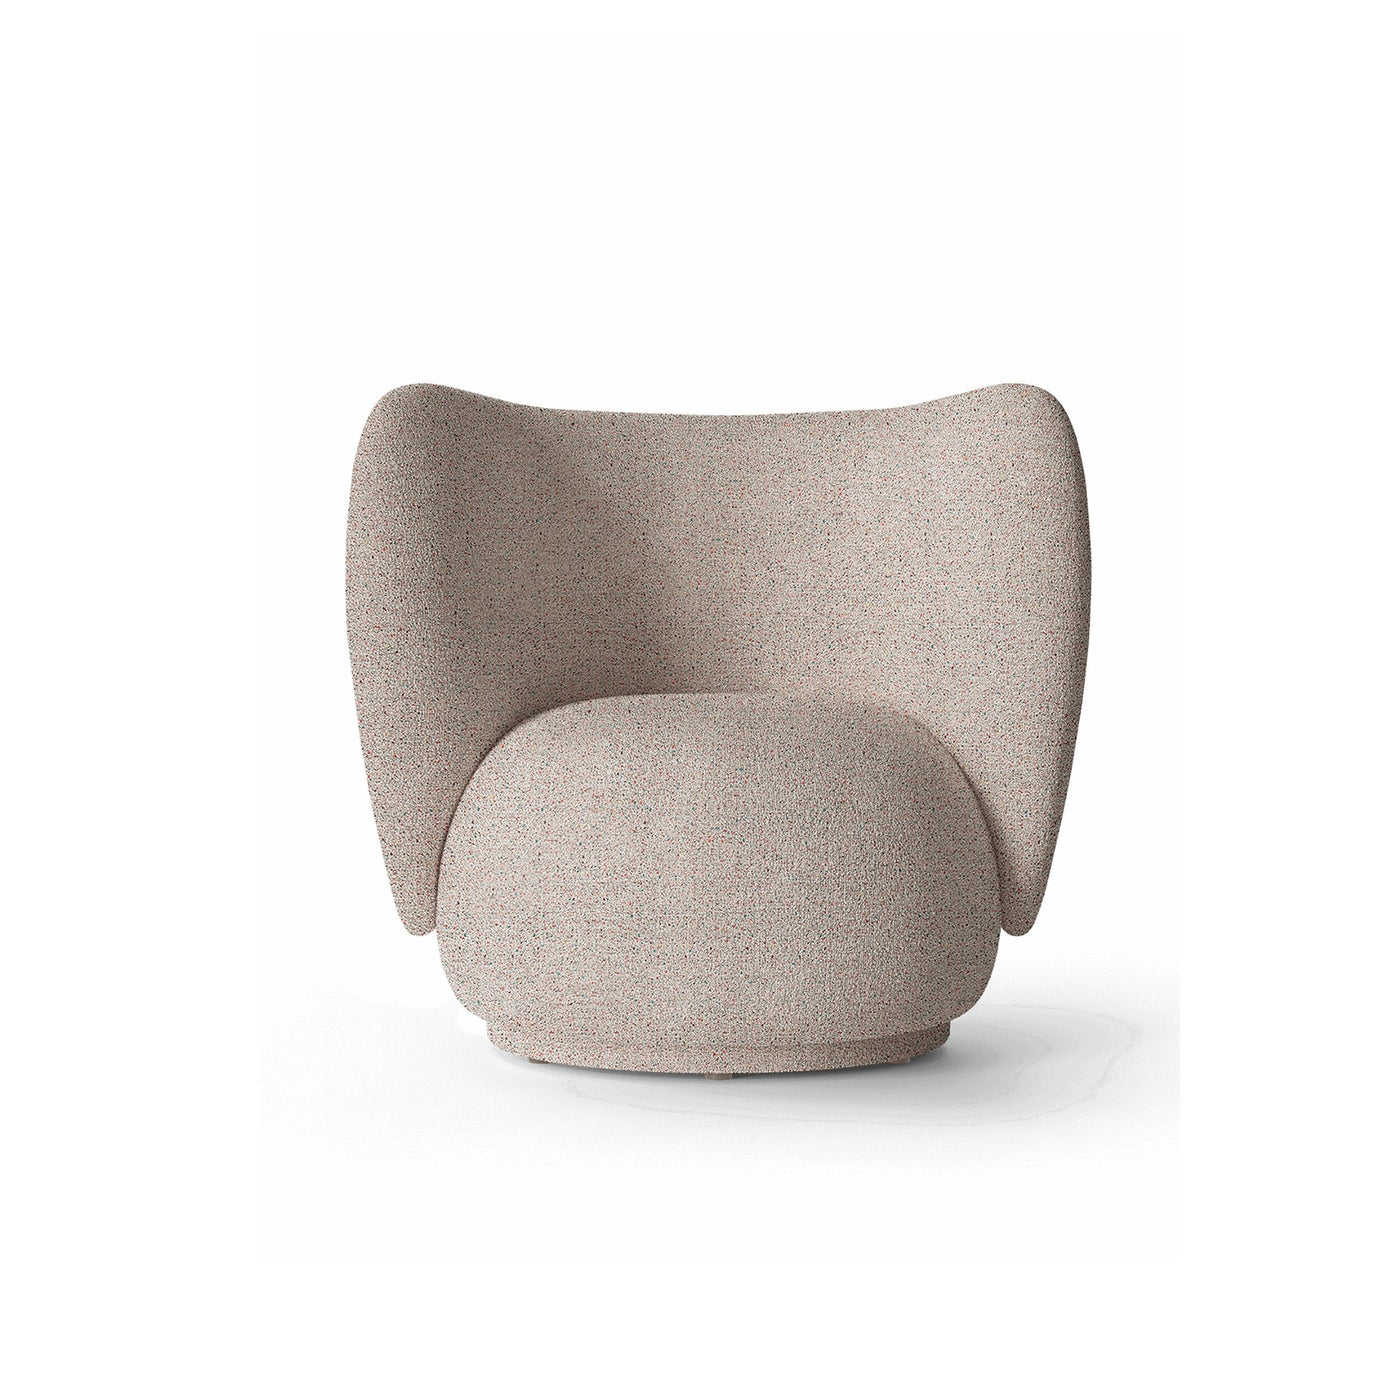 Ferm Living Rico Lounge Chair. Made to order from someday designs 1104265839. #colour_light-grey-confetti-boucle